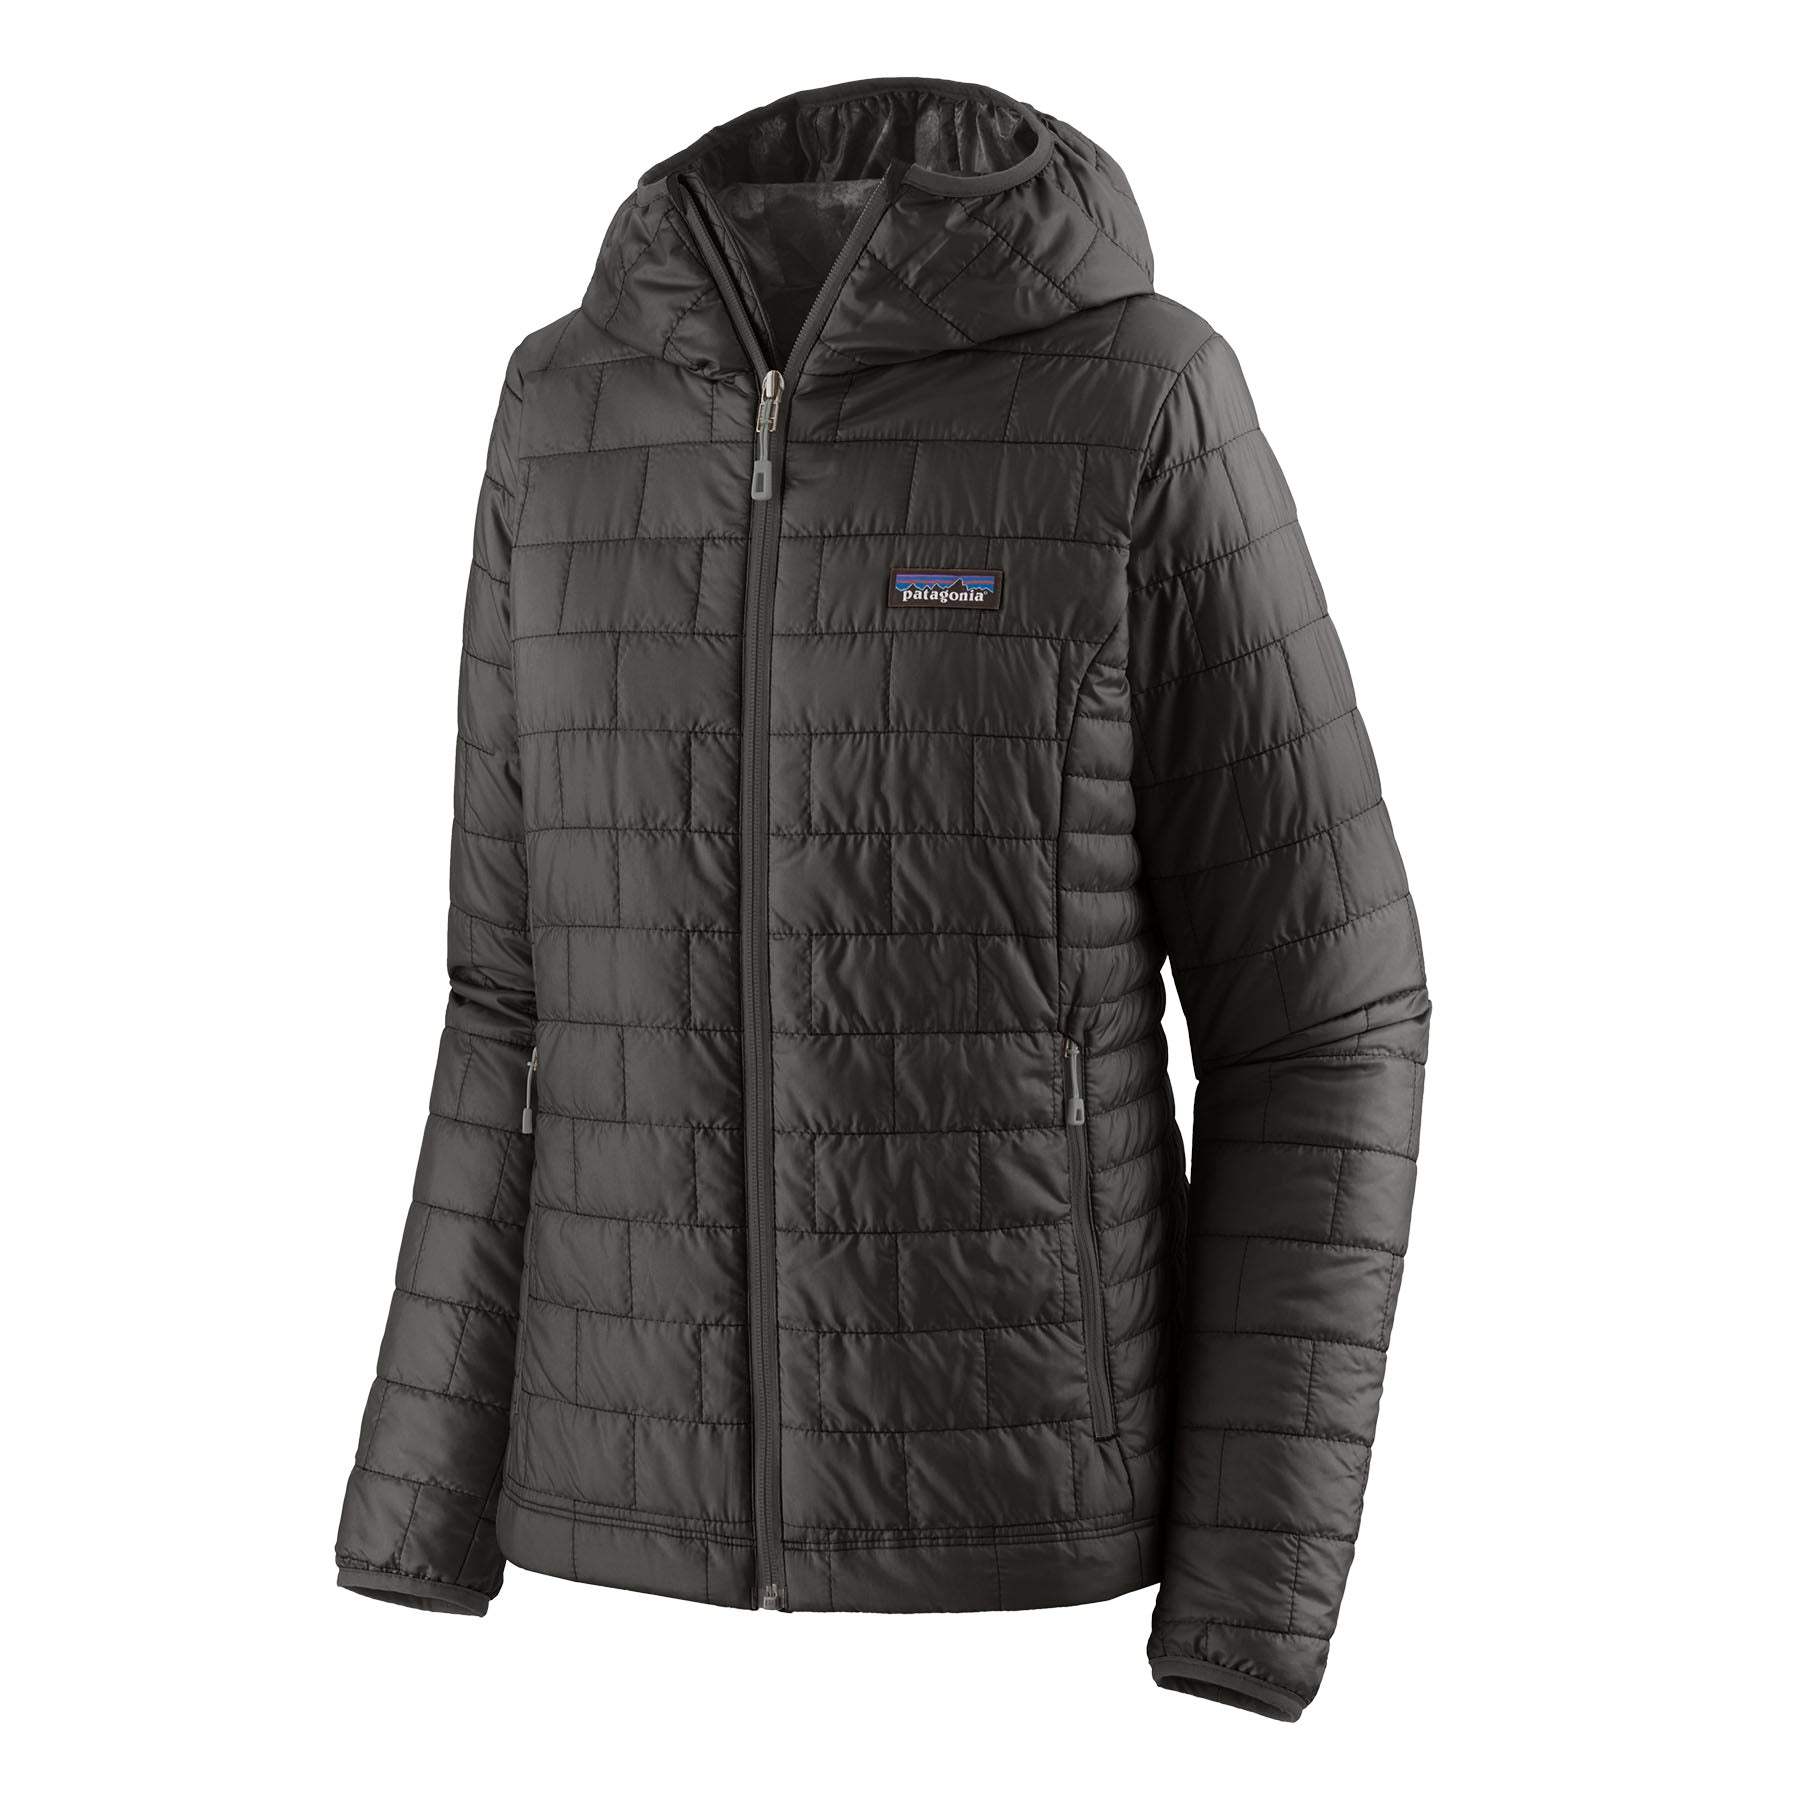 Women’s Nano Puff Hoody by Patagonia - The Luxury Promotional Gifts Company Limited